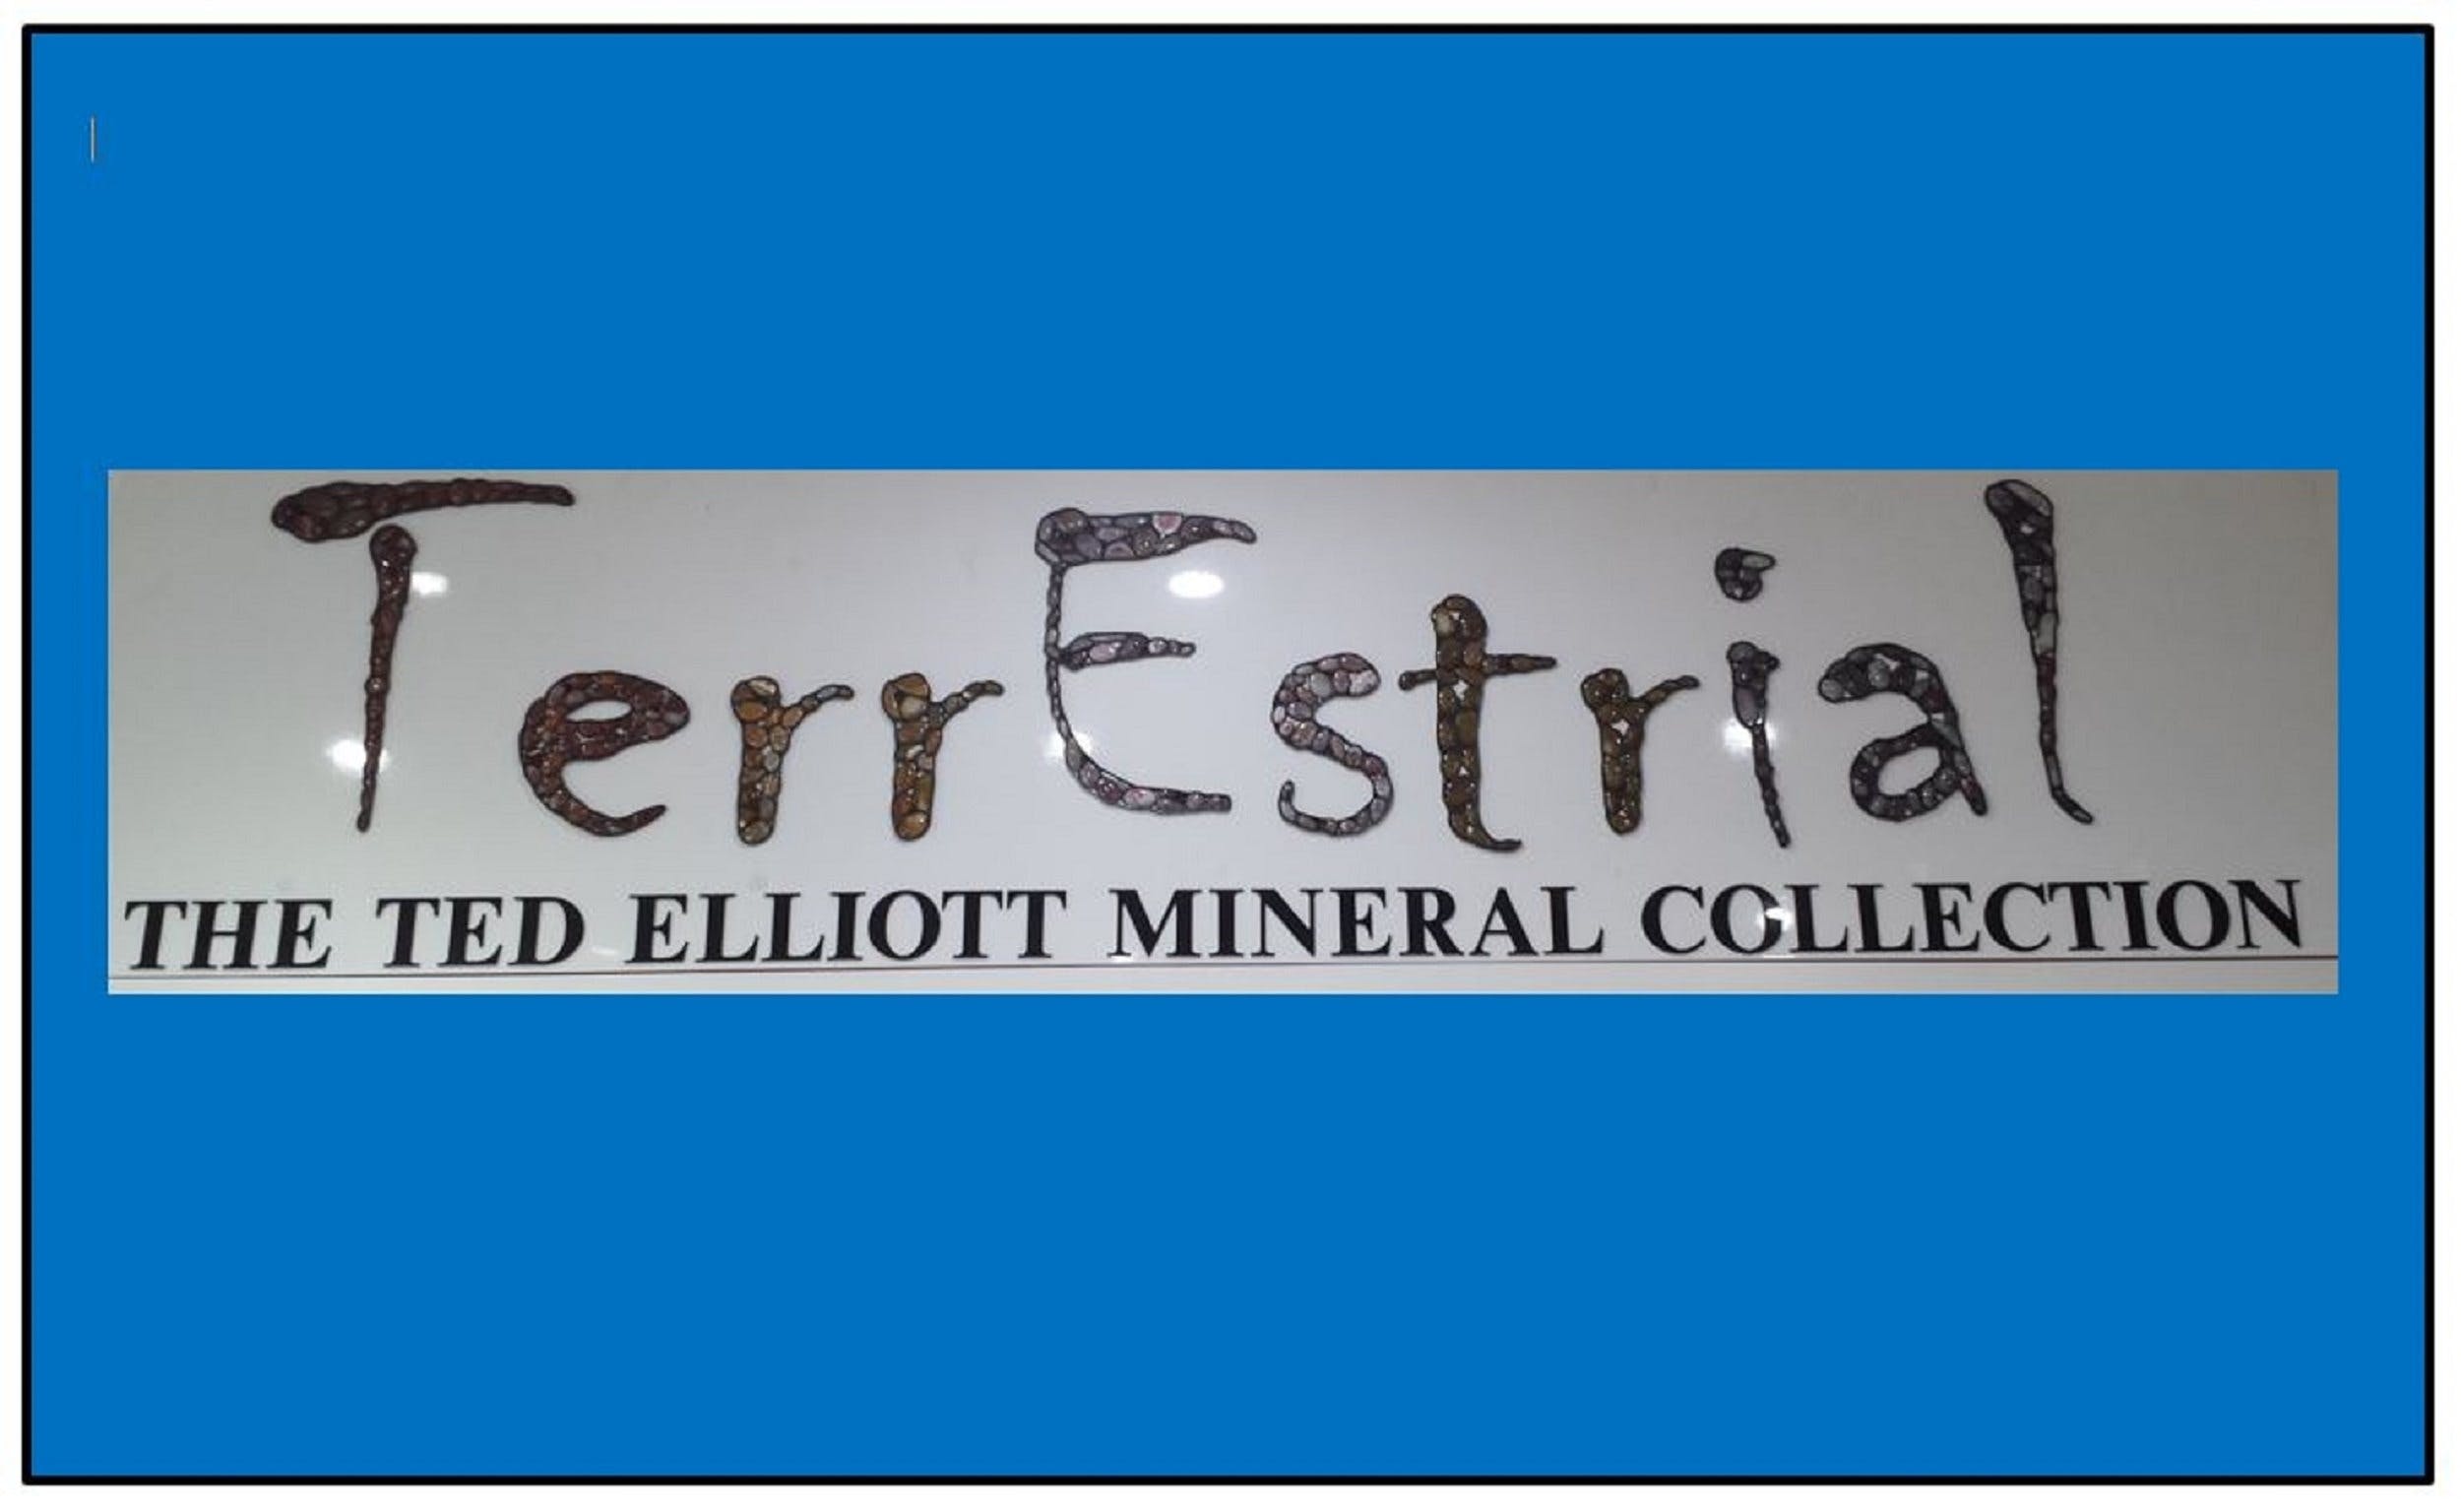 The Ted Elliott Mineral Collection - Tourism Cairns